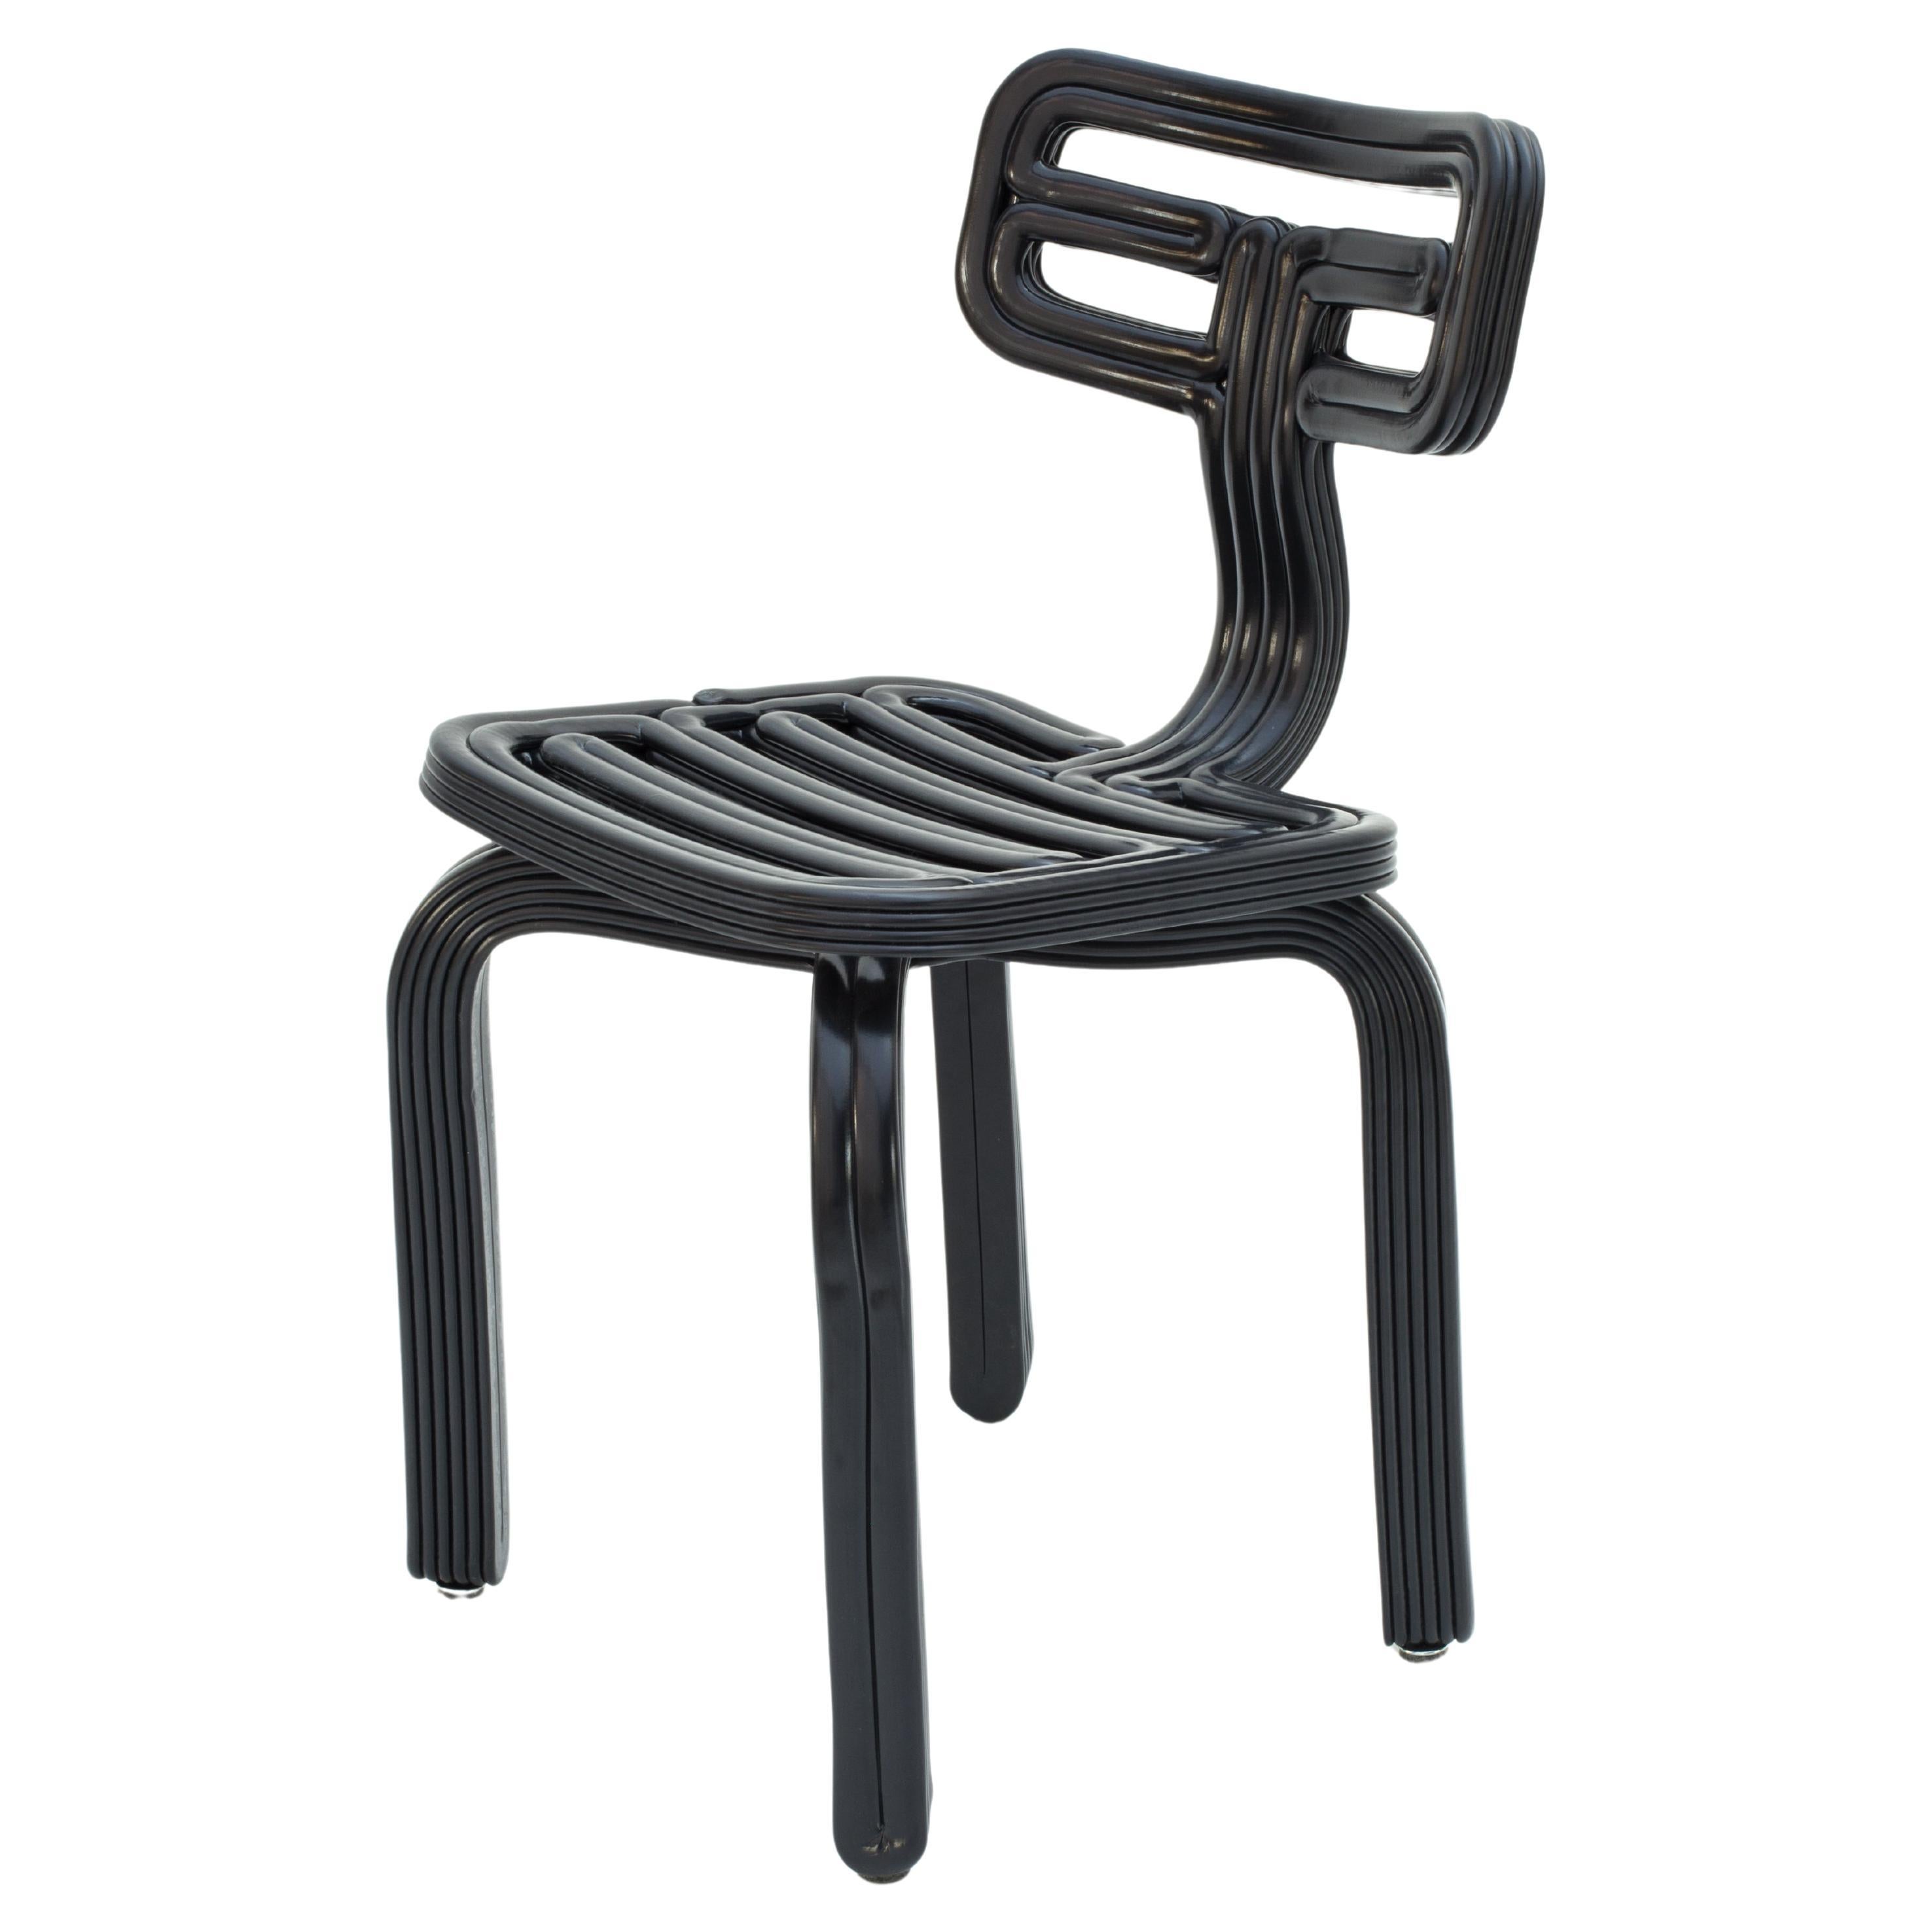 Black Chubby Chair in 3d Printed Recycled Plastic